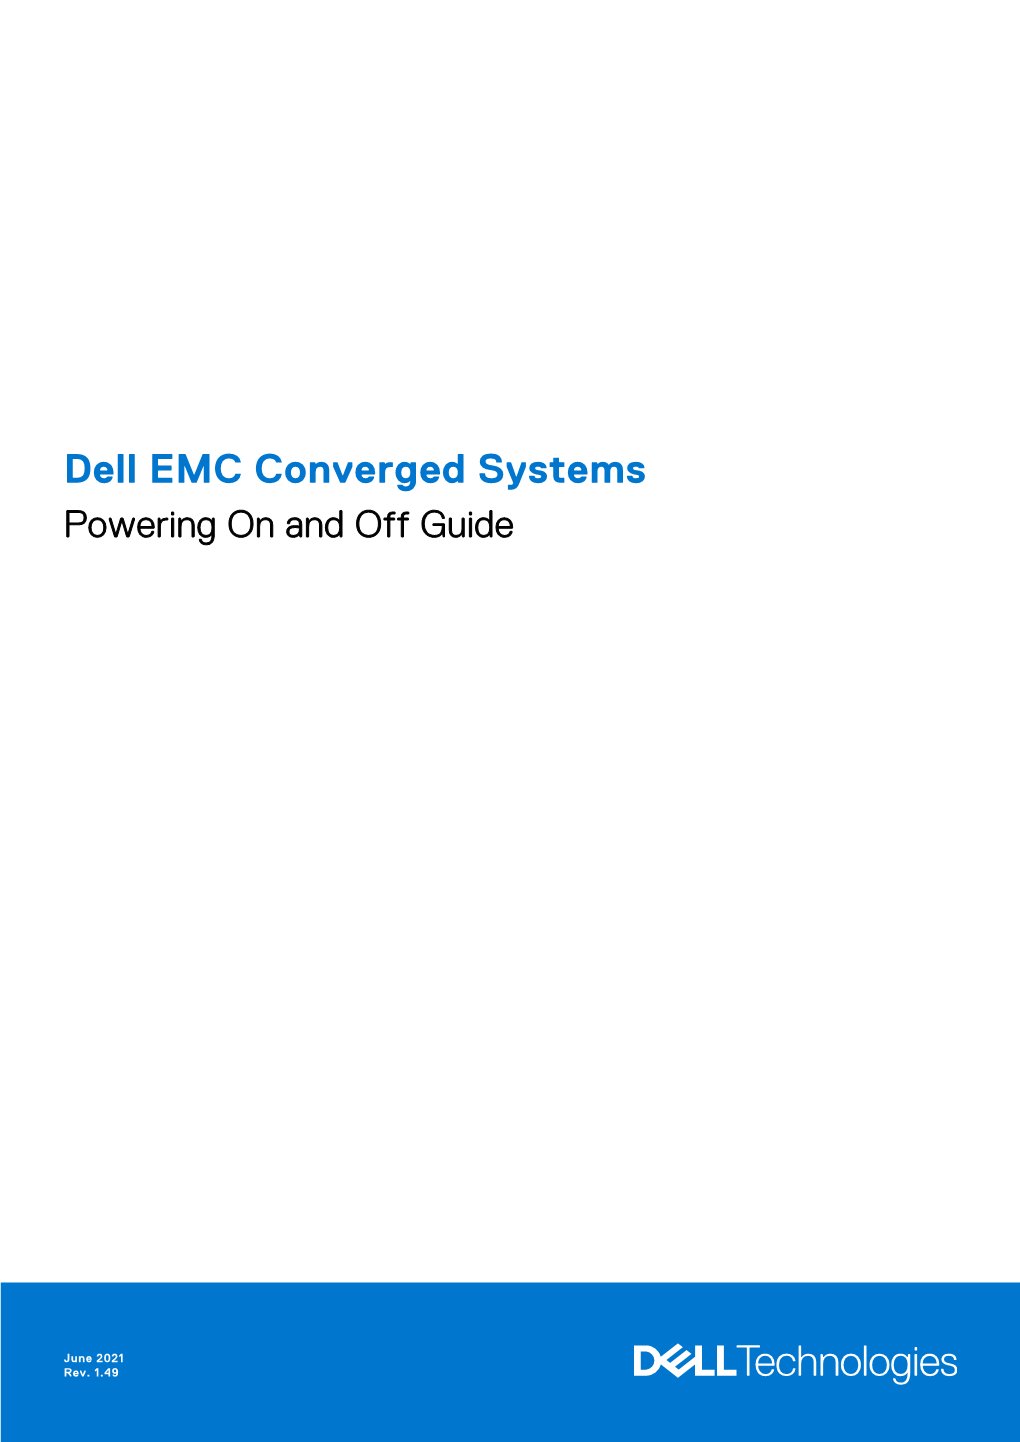 Dell EMC Converged Systems Powering on and Off Guide